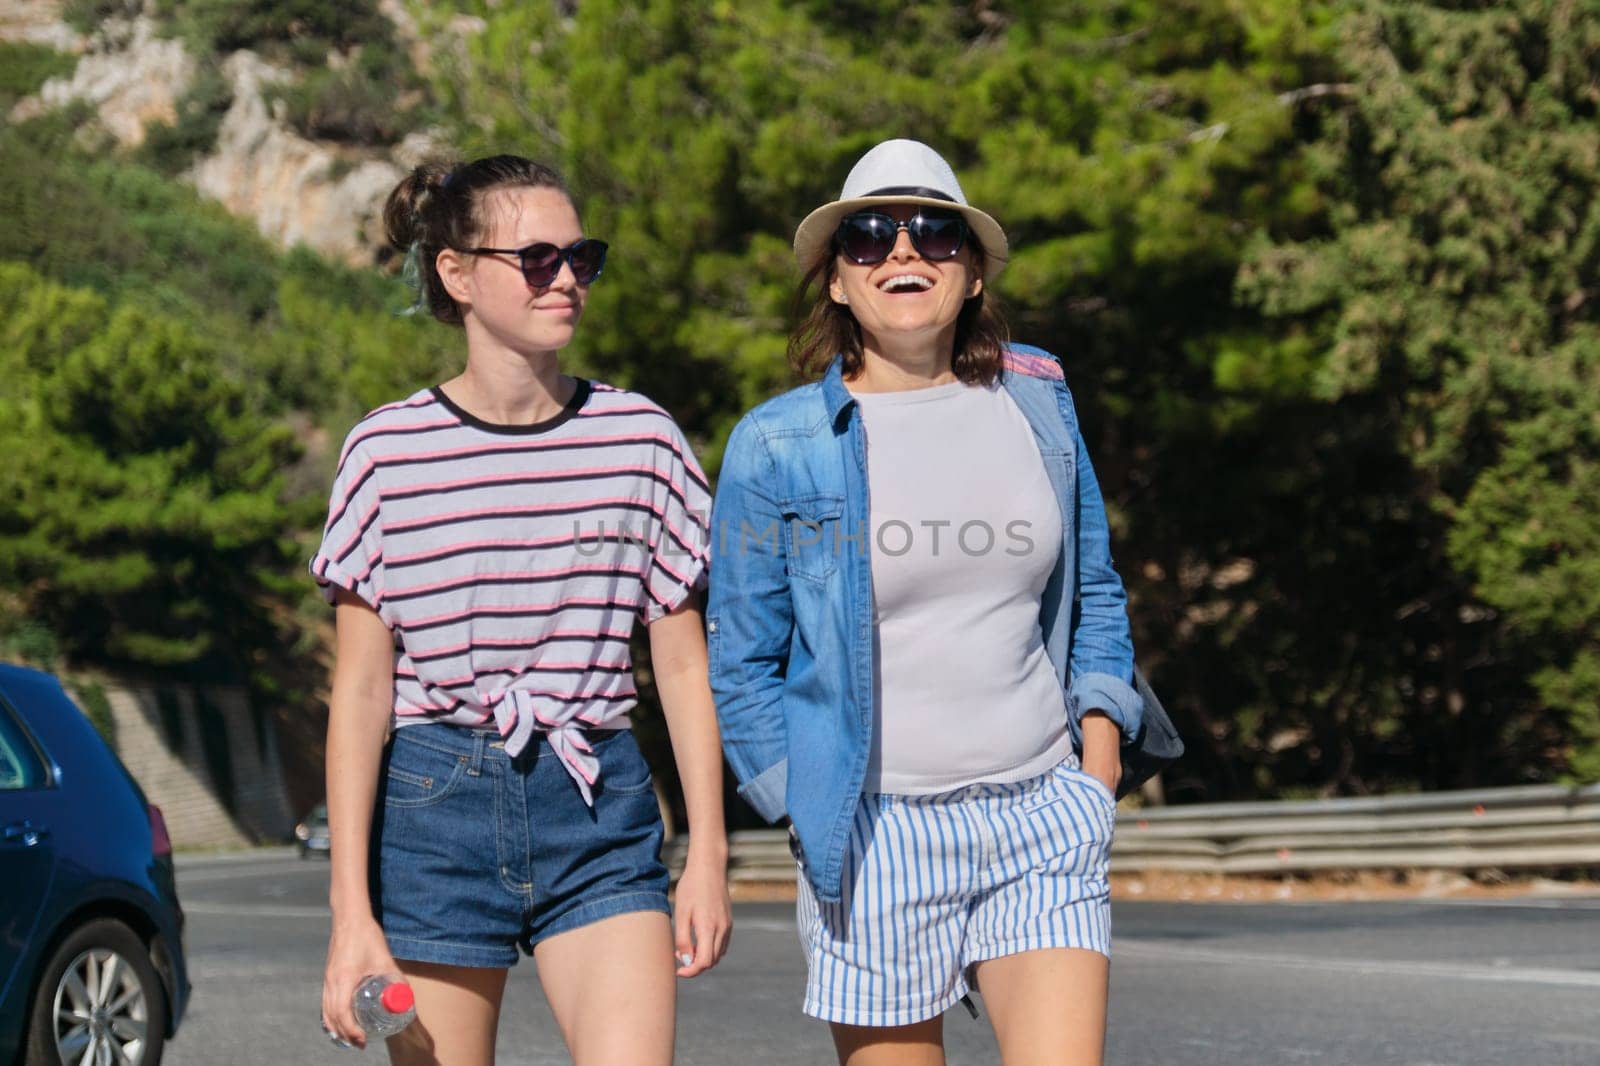 Two women mother and daughter teenager walking on sunny summer day on mountain road. Tourism, excursions, travel, family vacations